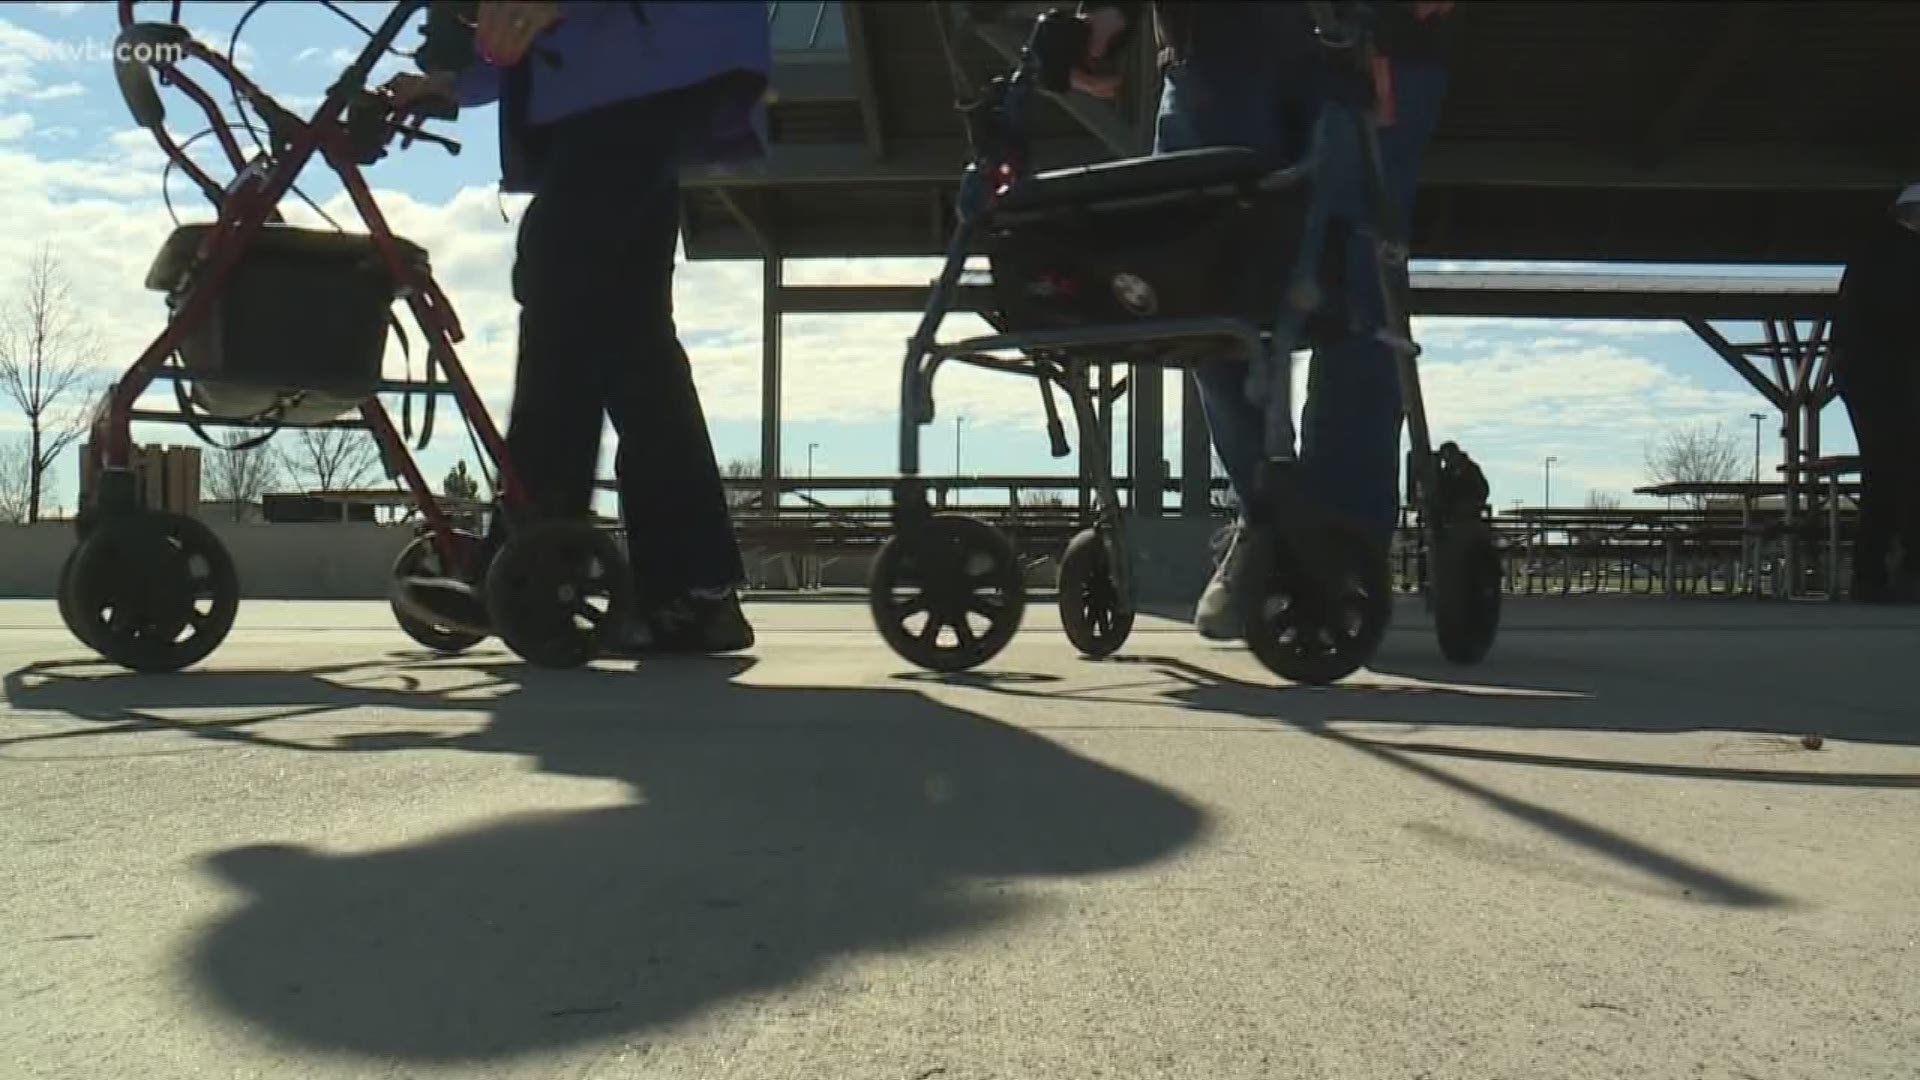 More than 37,000 seniors in Idaho struggle with hunger and the walk helps raise money to help those in need.